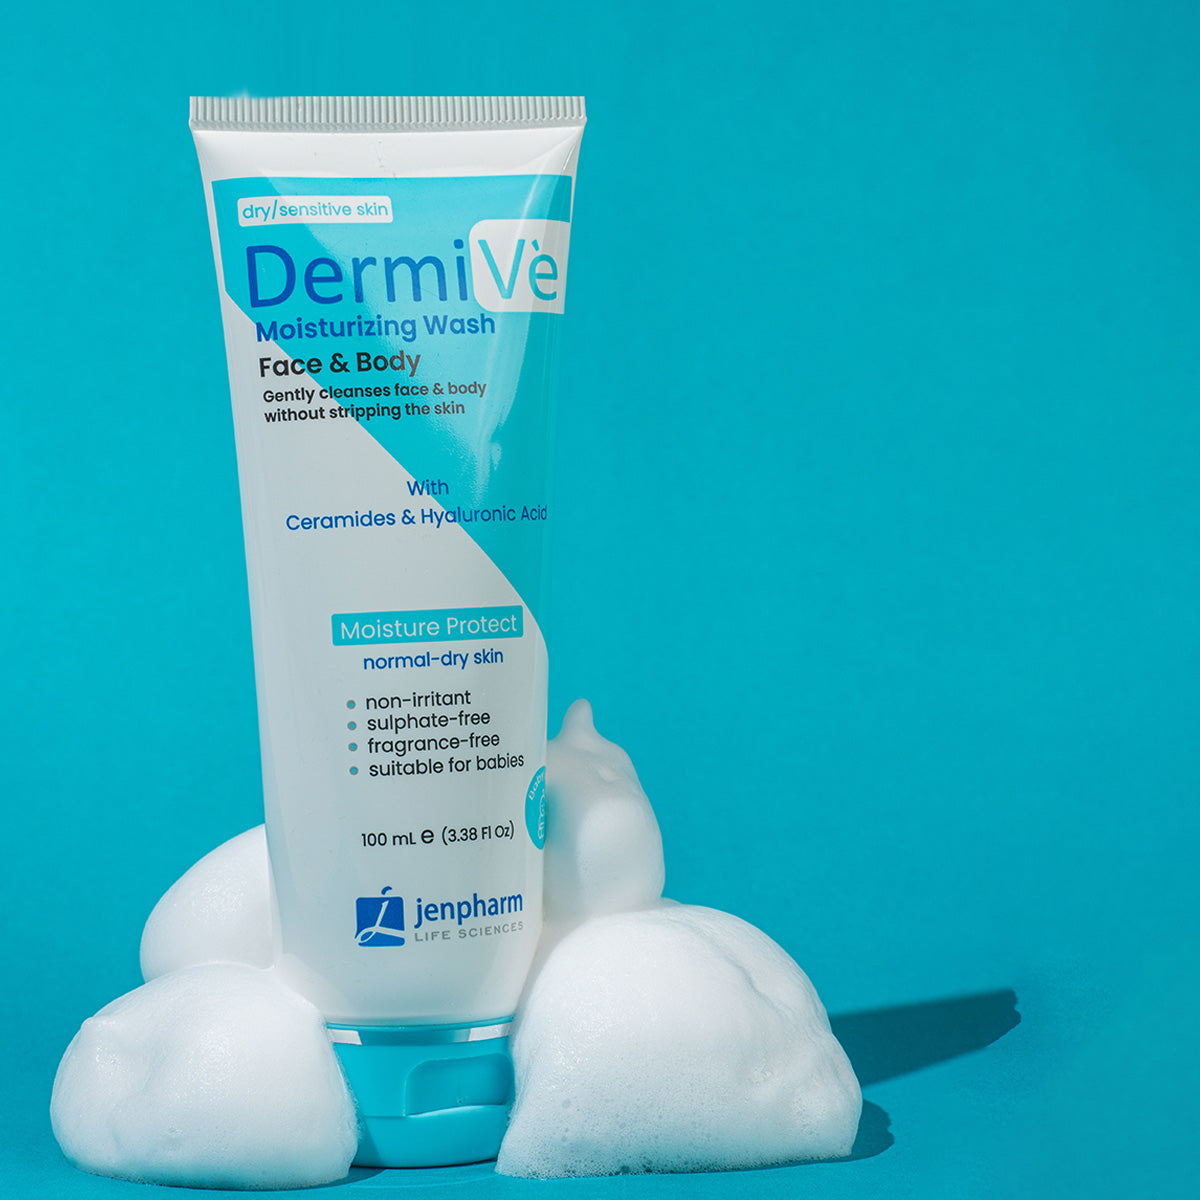 Buy Dermive Moisturizing Wash from Jenpharm at the Best Prices online in Pakistan, Quick Delivery and Easy Returns only at The Nature's Store, Best organic and natural Facewash and Anti Aging, Dry Skin, Glow in Pakistan, 